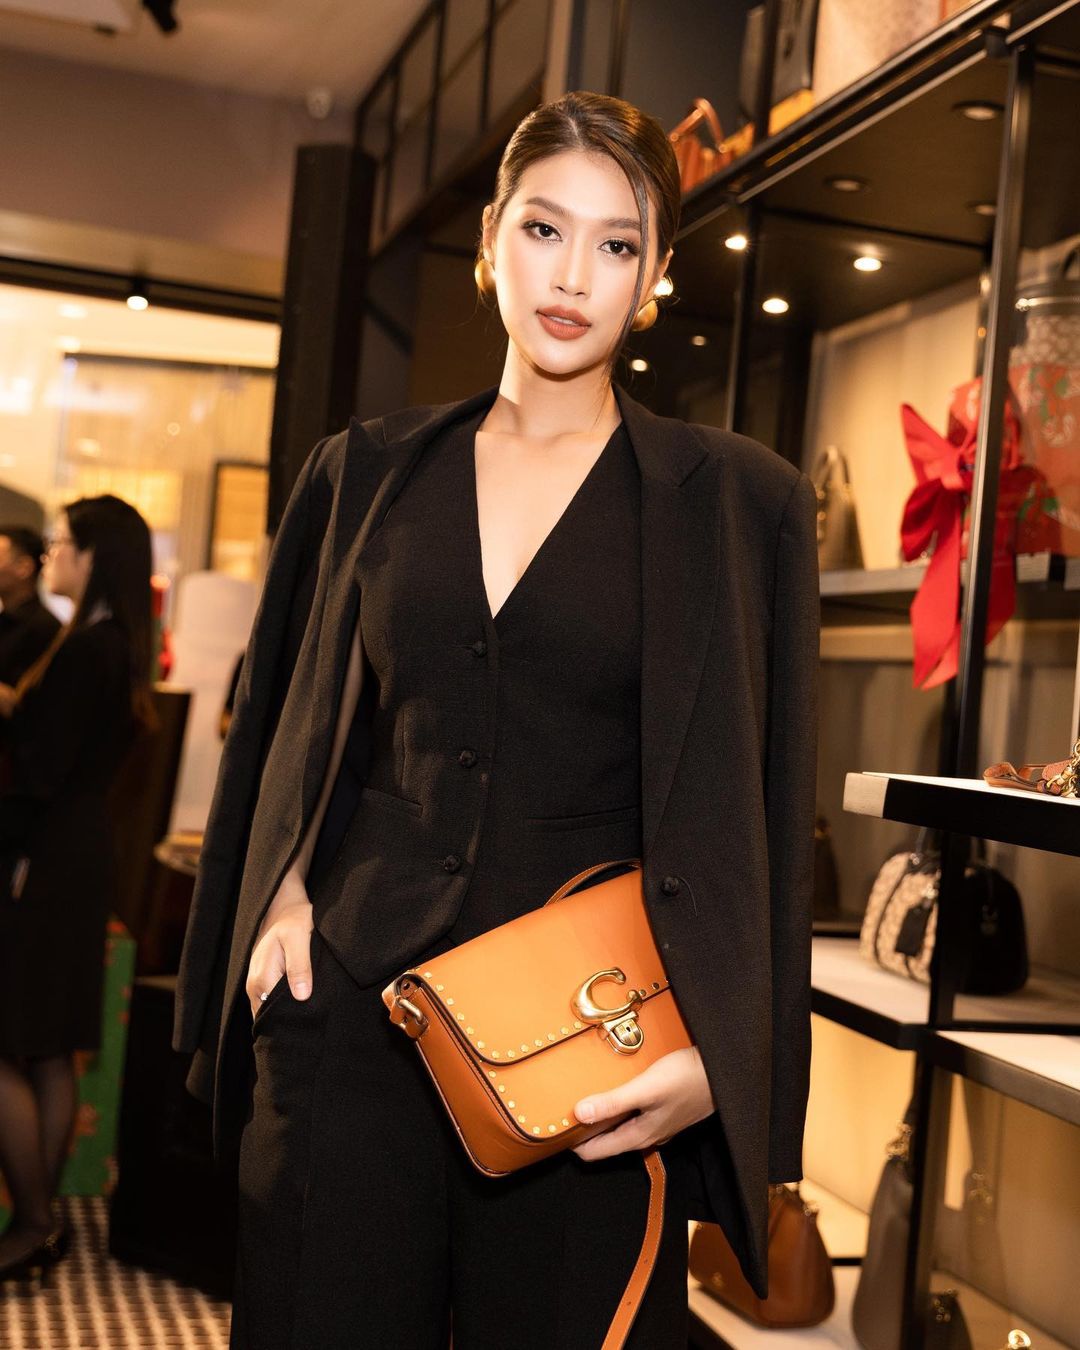 Miss Grand Vietnam Doan Thien An stands out in a stylish menswear and Coach bag design with a proudly attached C symbol